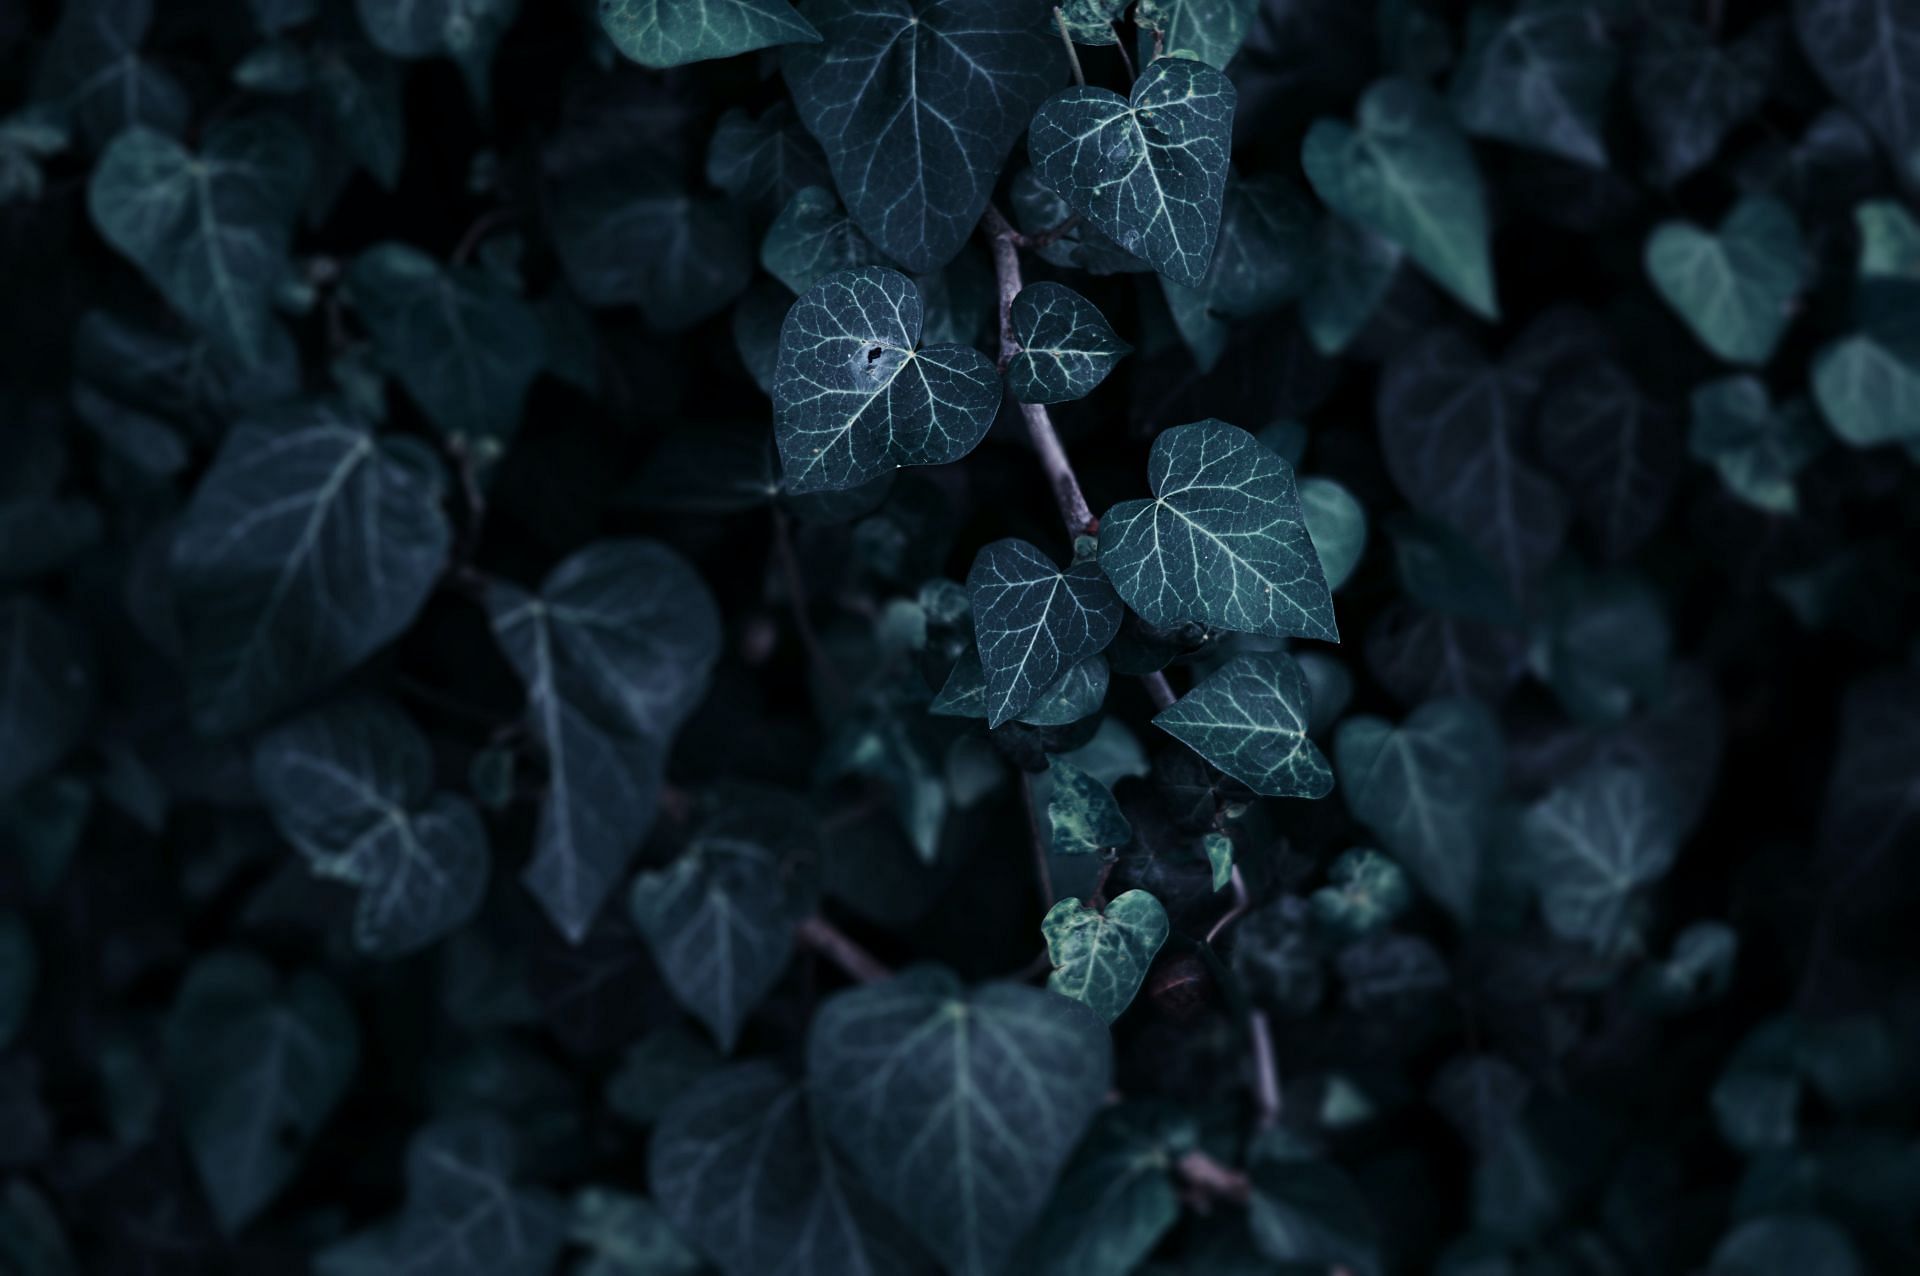 One must be aware of treatment of poison ivy. (Image via Unsplash/ Yousef Espanioly)